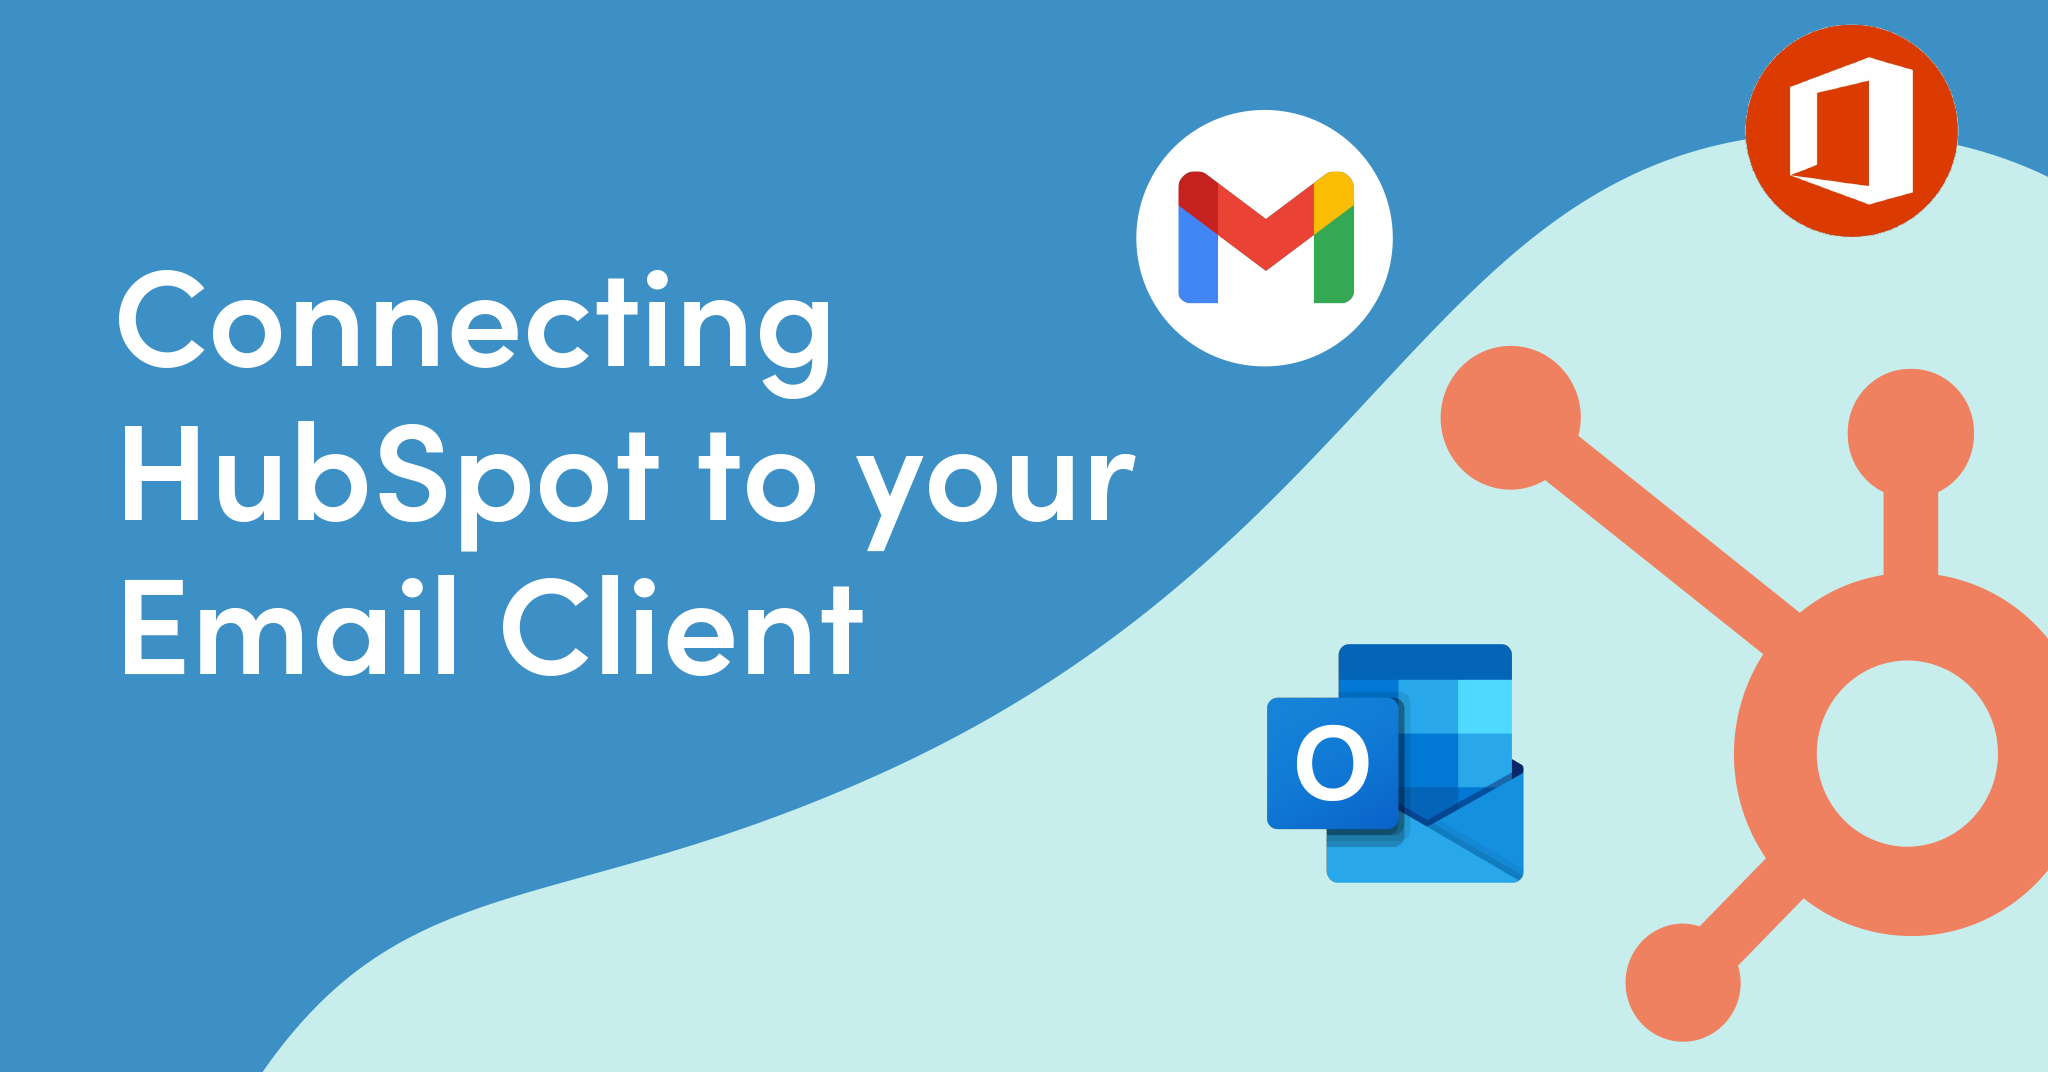 Connecting HubSpot to your email client